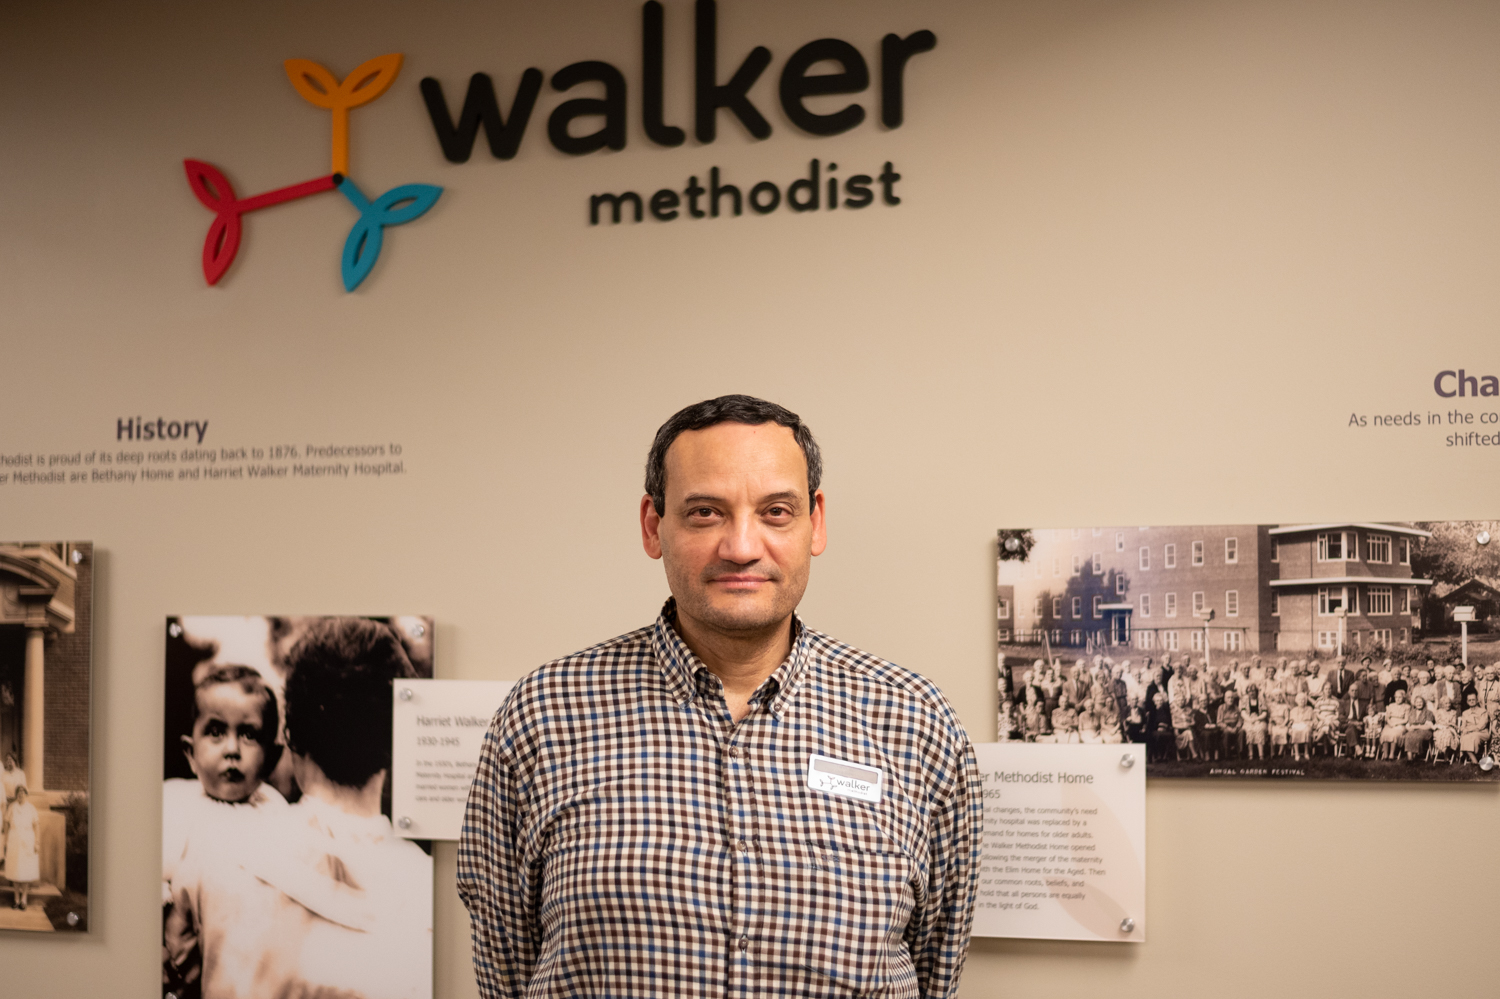 More than a job: Tarek’s 32 years of integrity and service at the Health Center